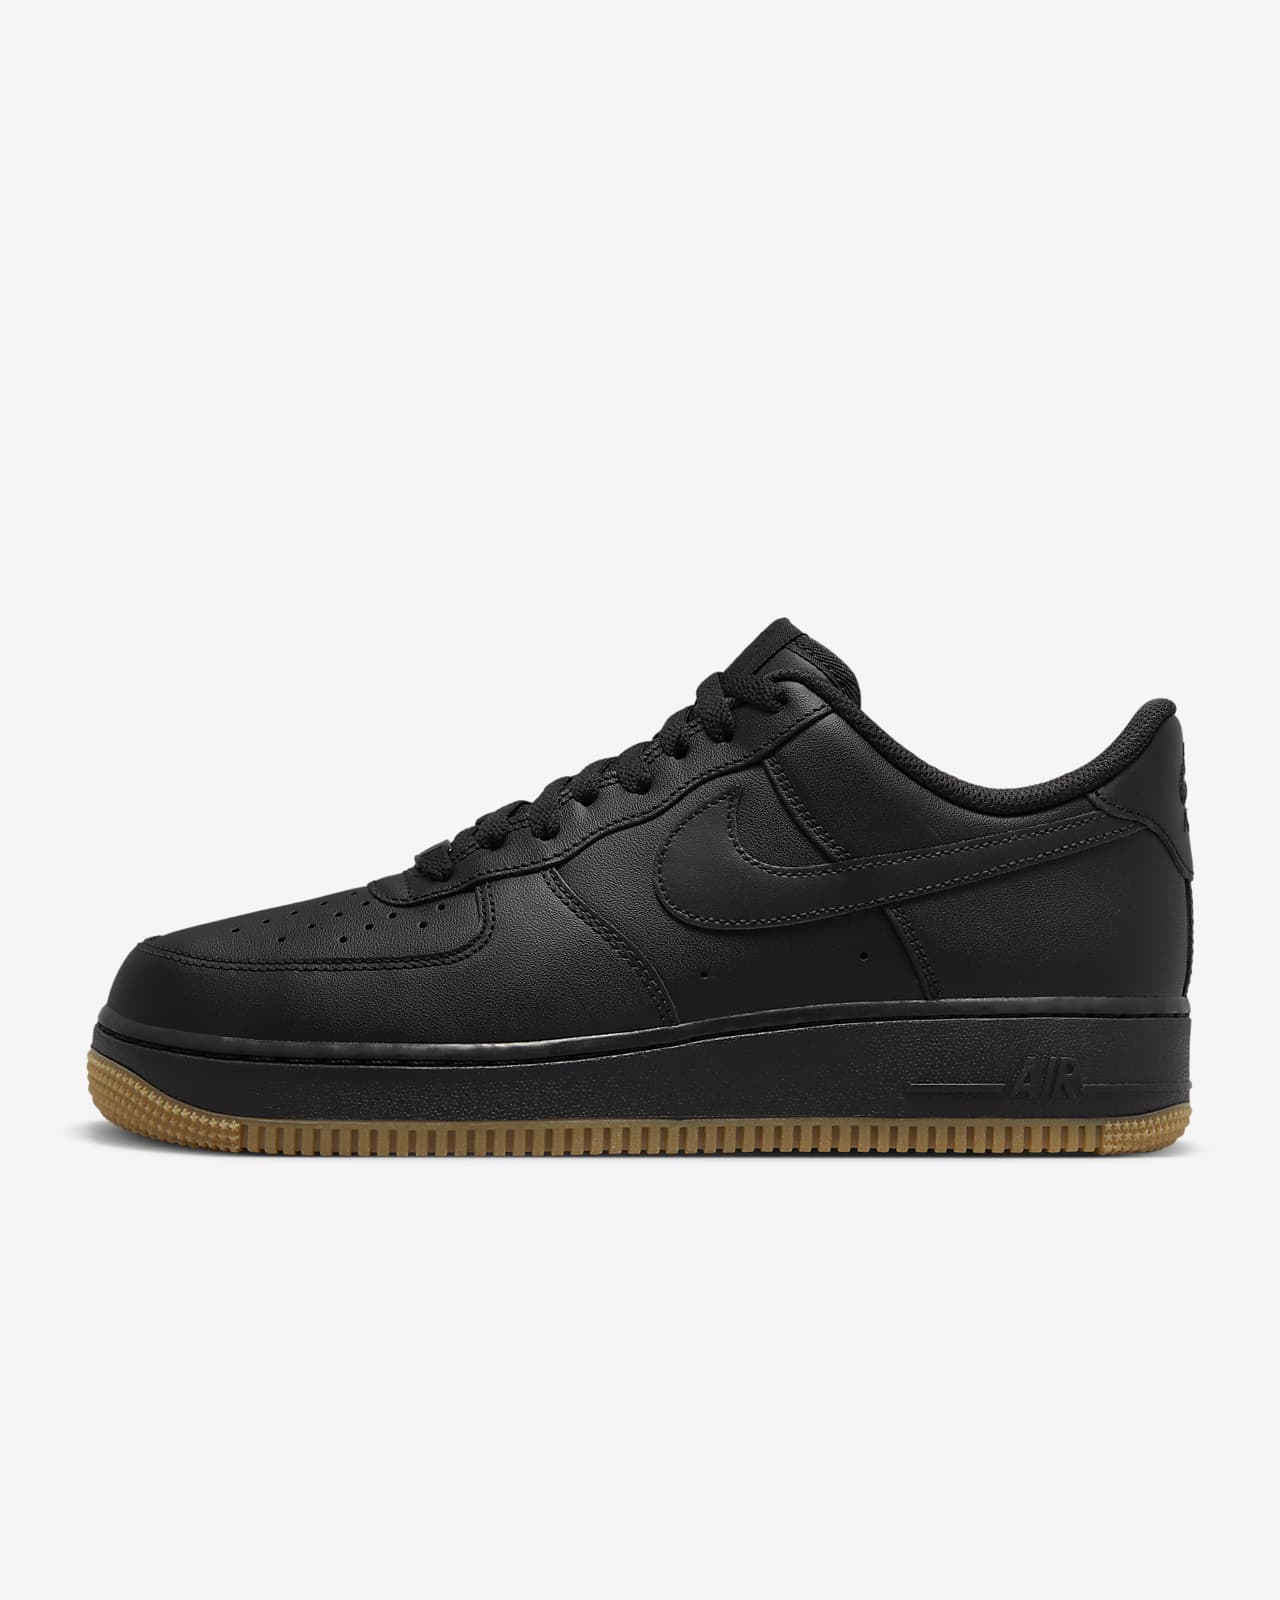 Road house Normally Realistic Nike Air Force 1 '07 Men's Shoes. Nike.com